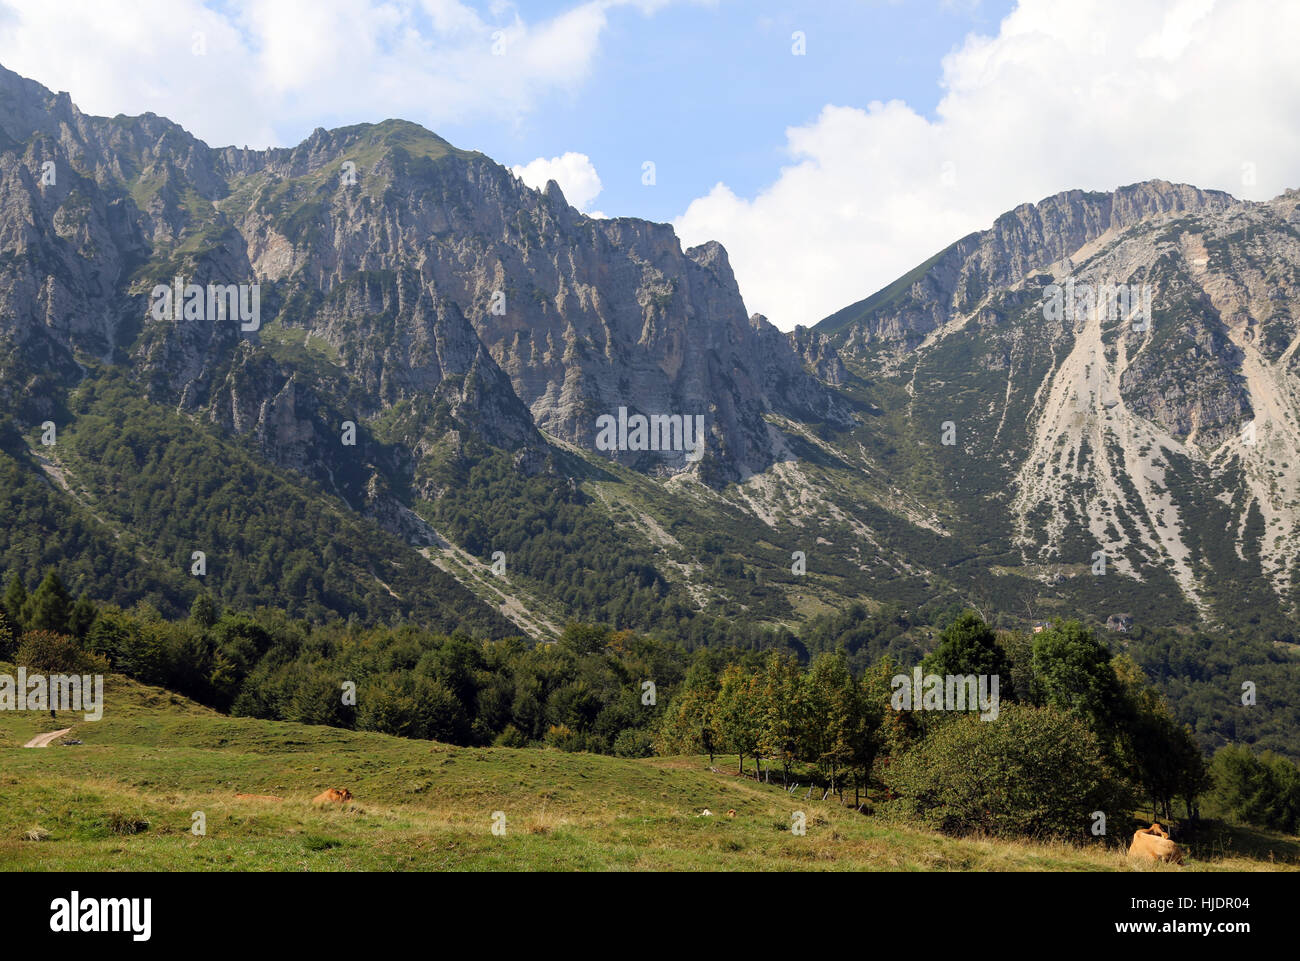 fntastic landscape of italian mountains called Venetian Prealps in the province of Vicenza in Italy Stock Photo